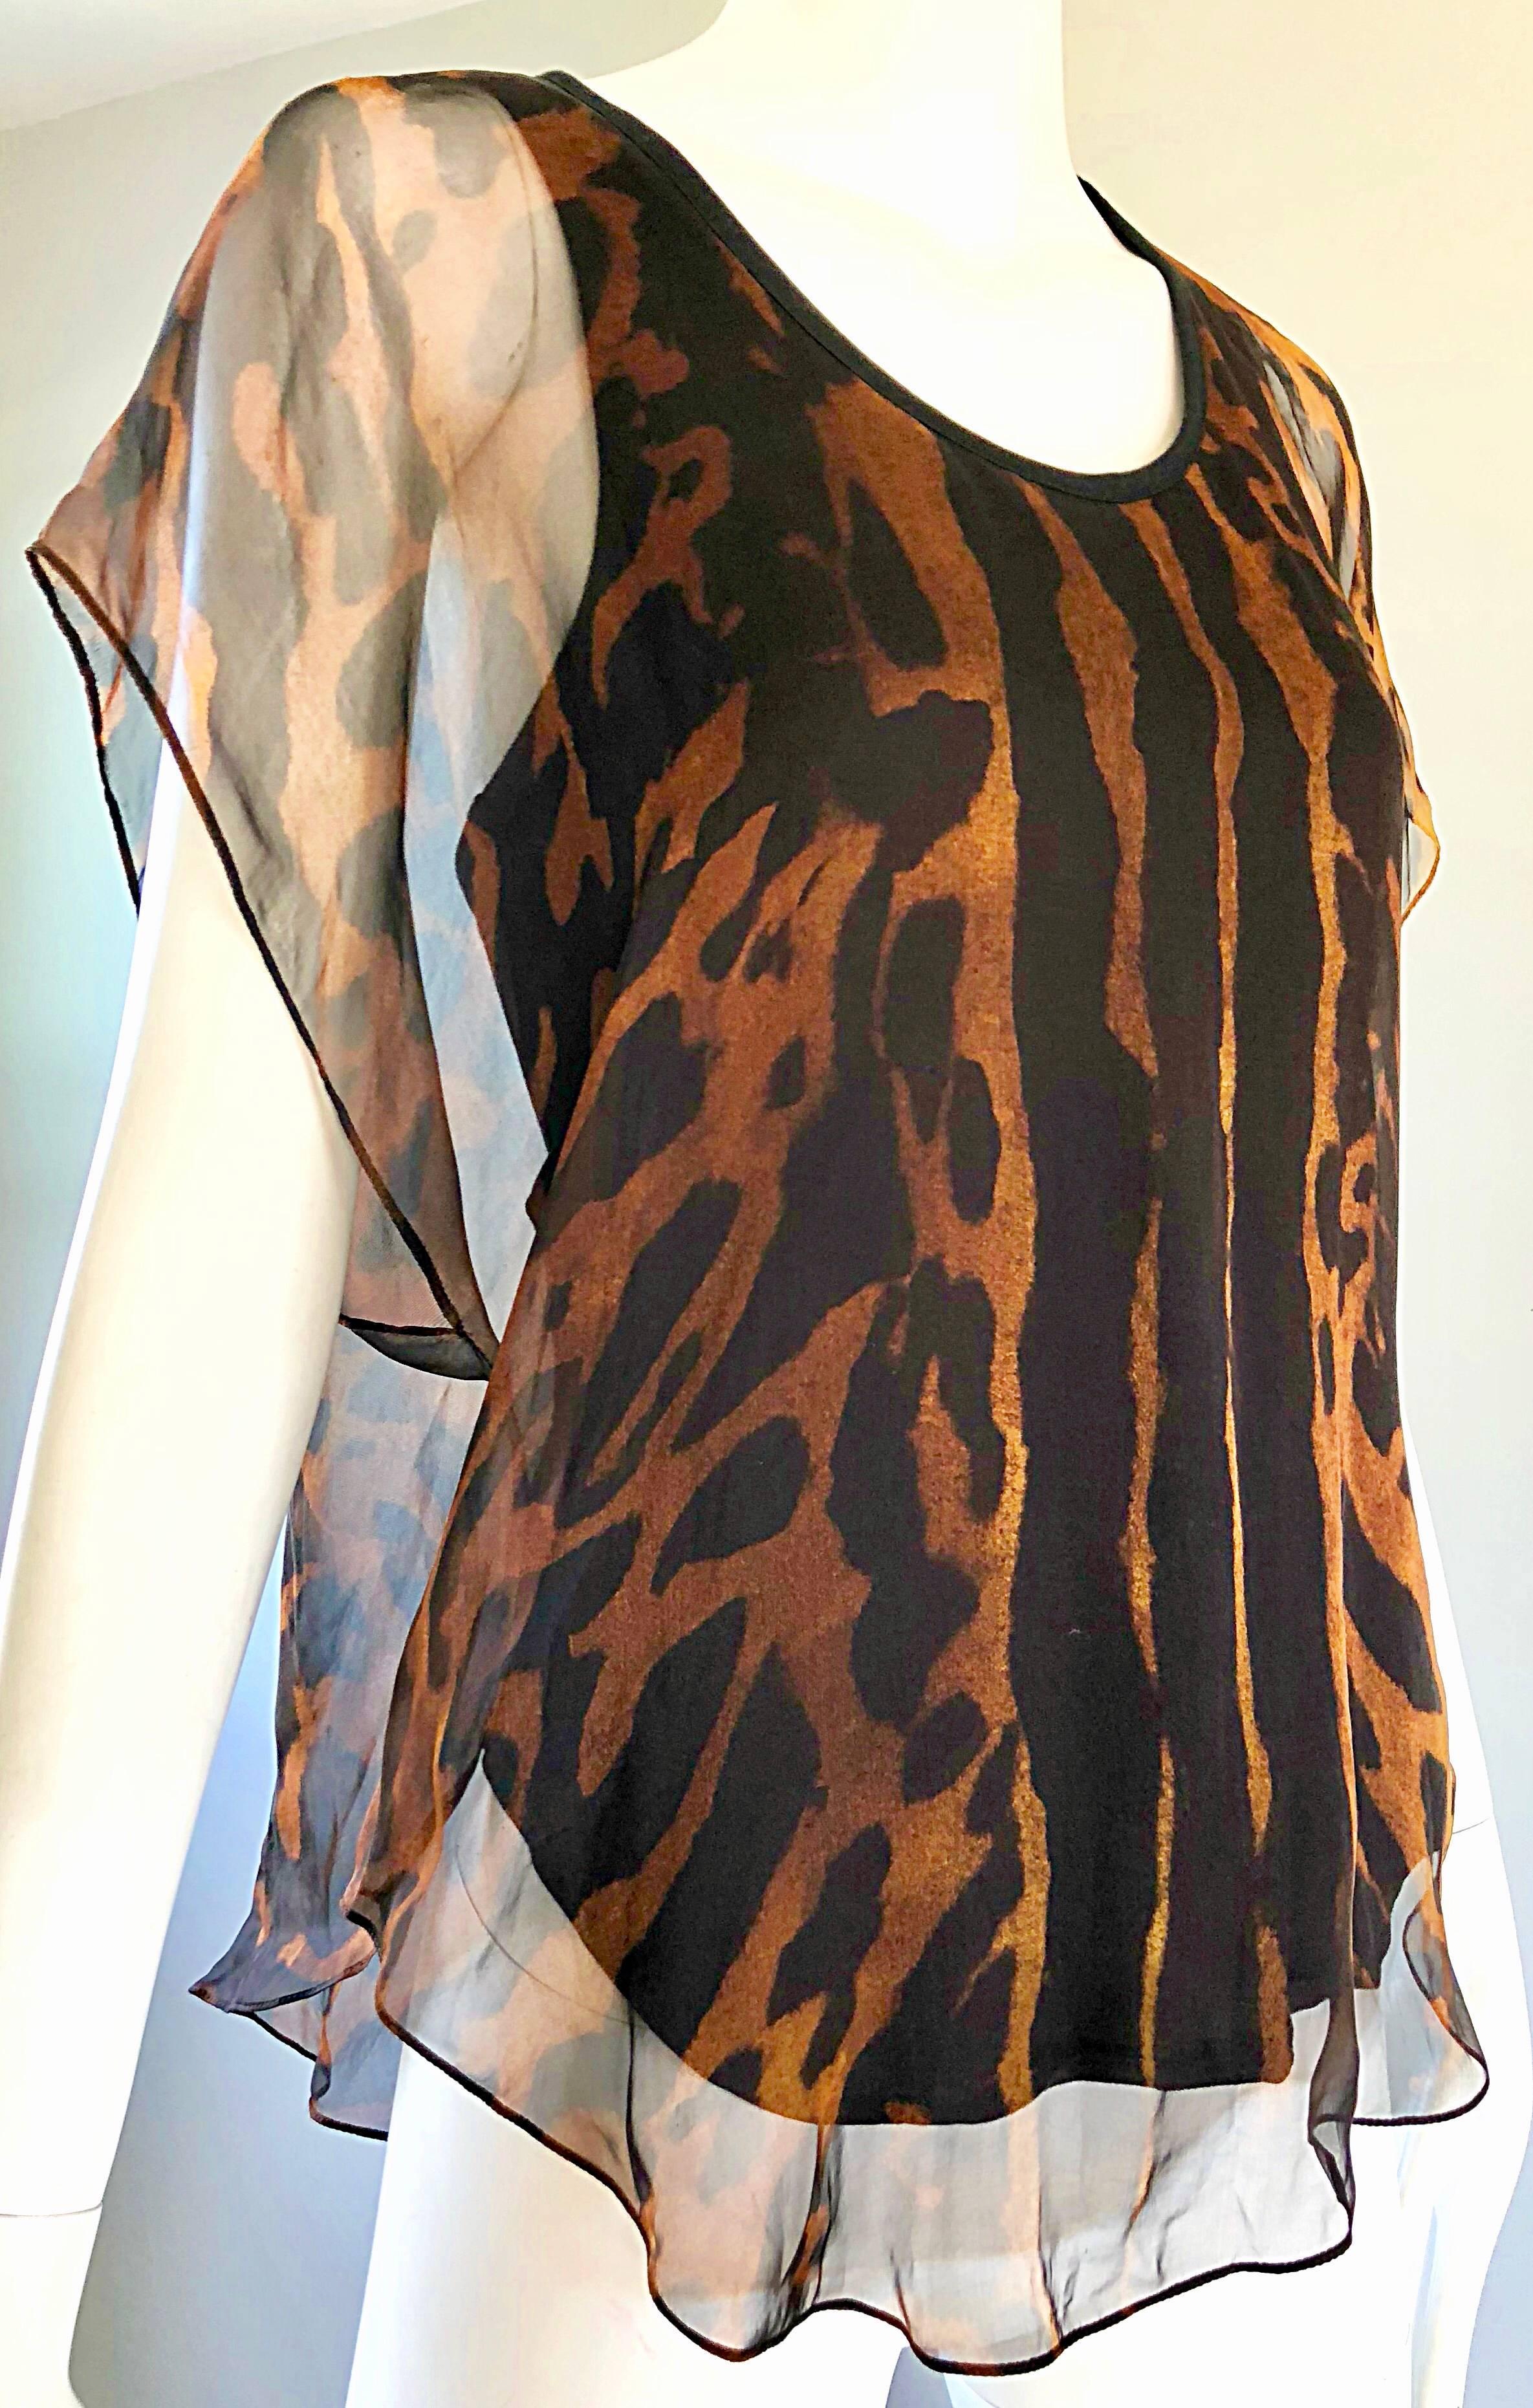 Alexander McQueen Early 2000s Leopard Cheetah Print Silk Chiffon Top / Blouse In Excellent Condition For Sale In San Diego, CA